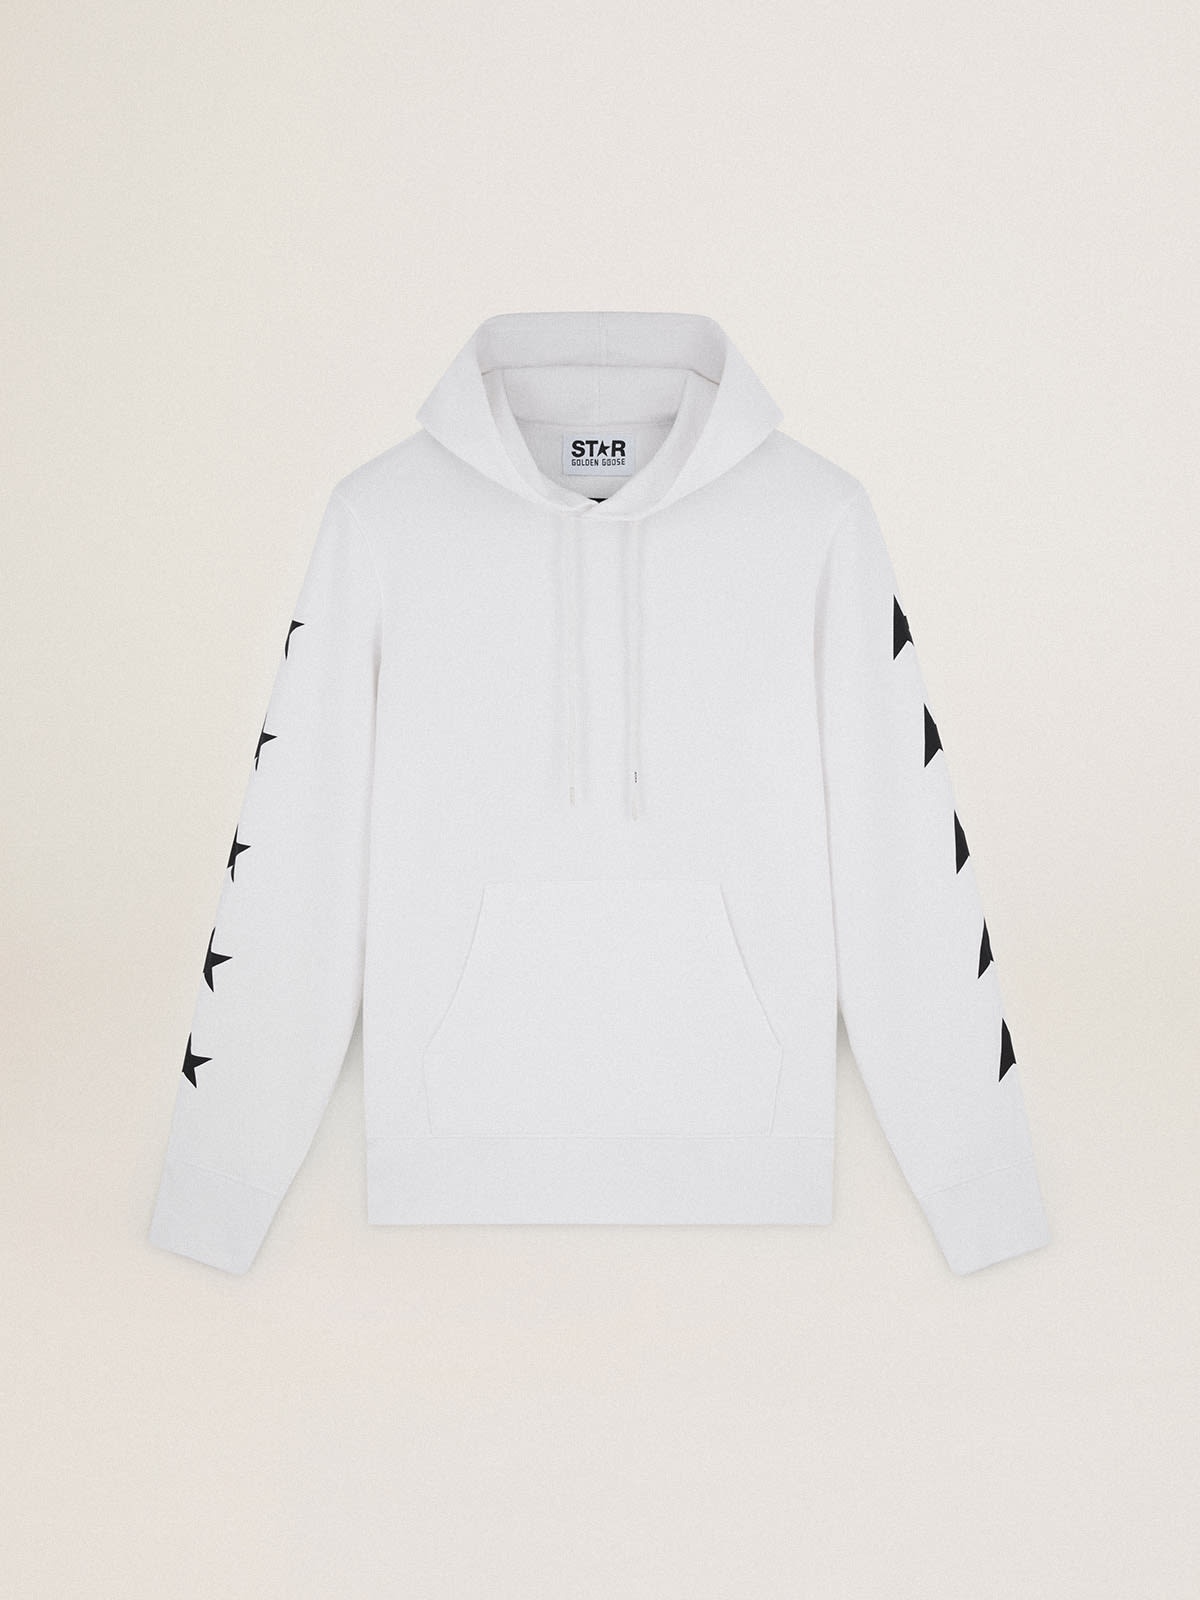 Alighiero Star Collection hooded sweatshirt in vintage white with contrasting black stars - 1